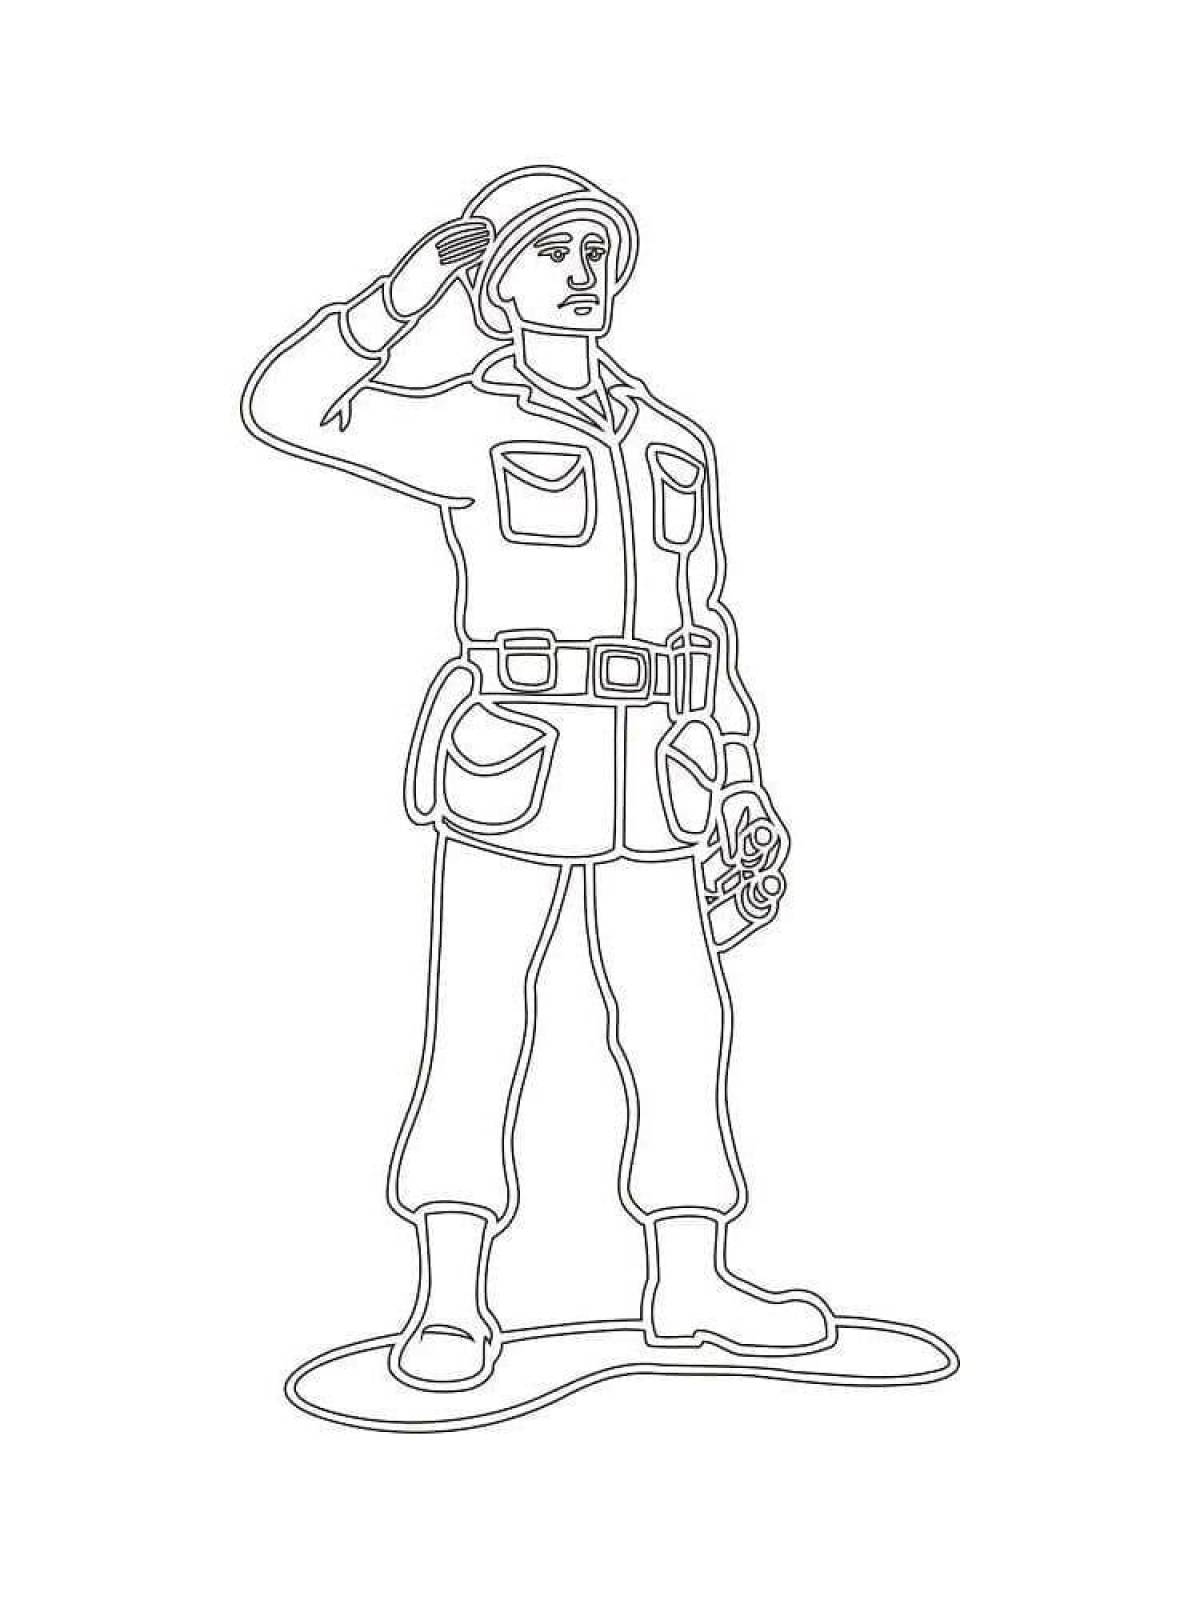 Colourful soldier coloring for kids